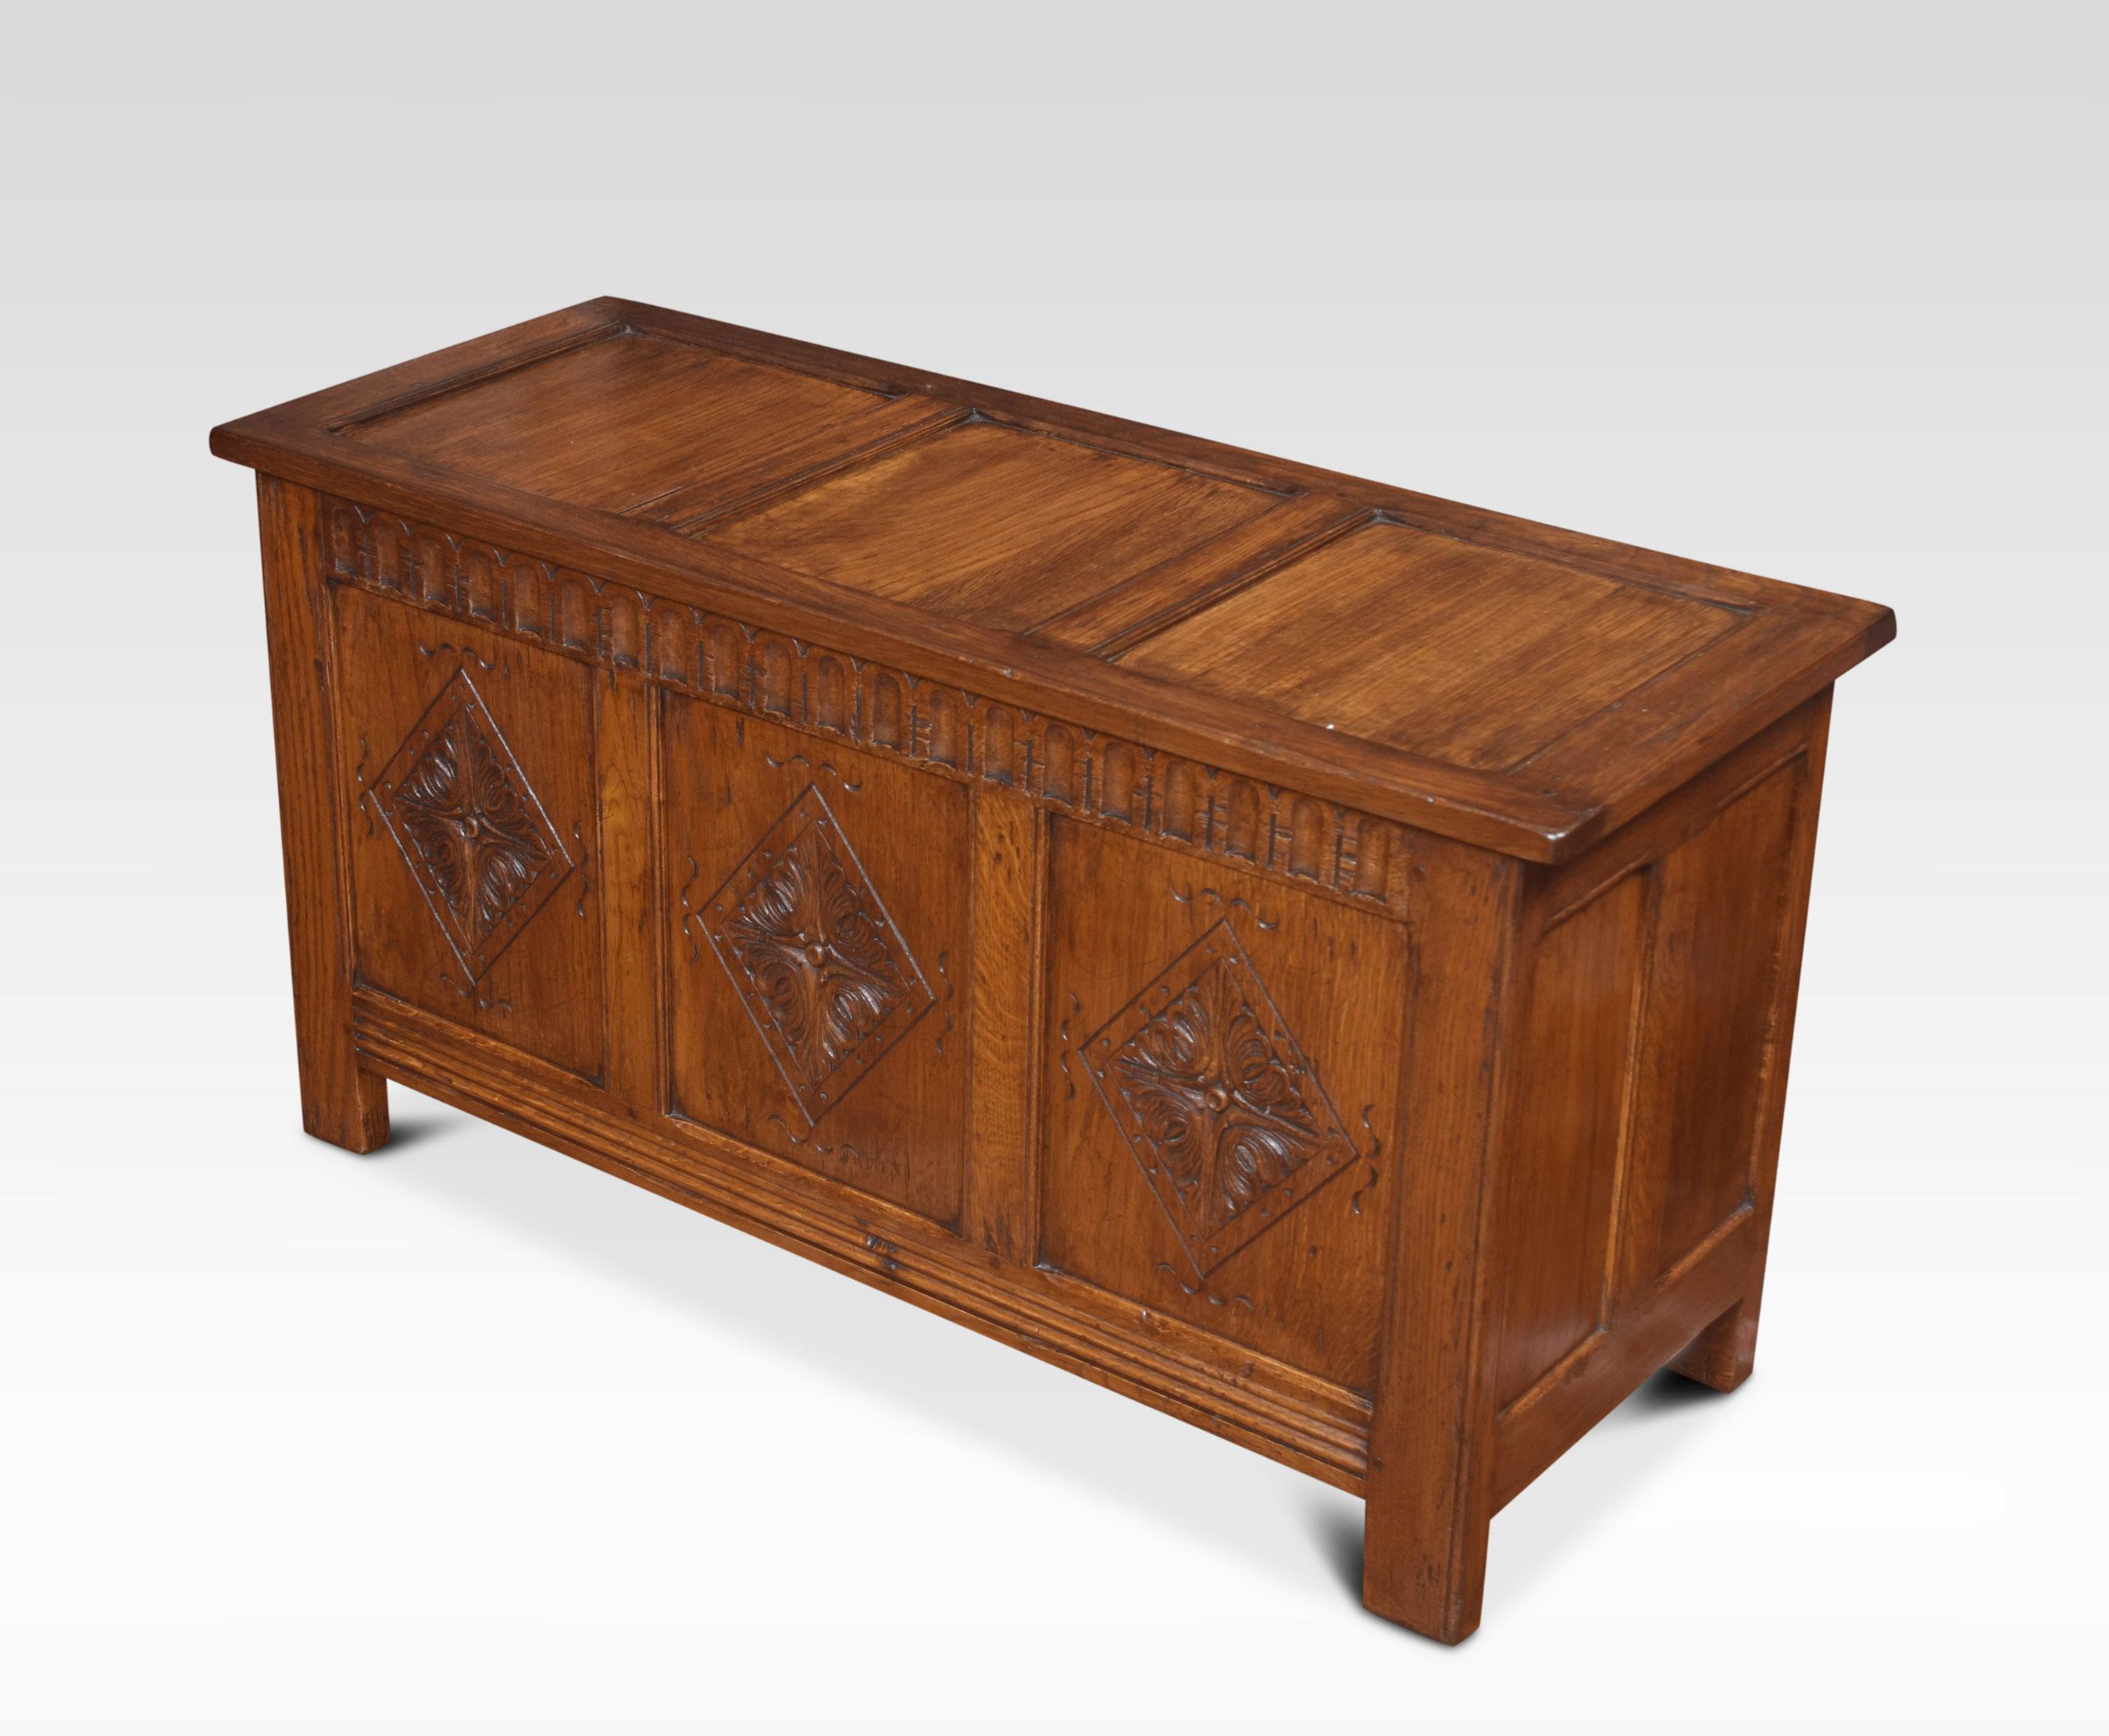 Oak coffer/blanket chest, the large rectangular hinged lid opening to reveal Lage storage facility. Above three carved panels. All raised up on stile feet.
Dimensions:
Height 22 inches
Width 42 inches
Depth 16 inches.